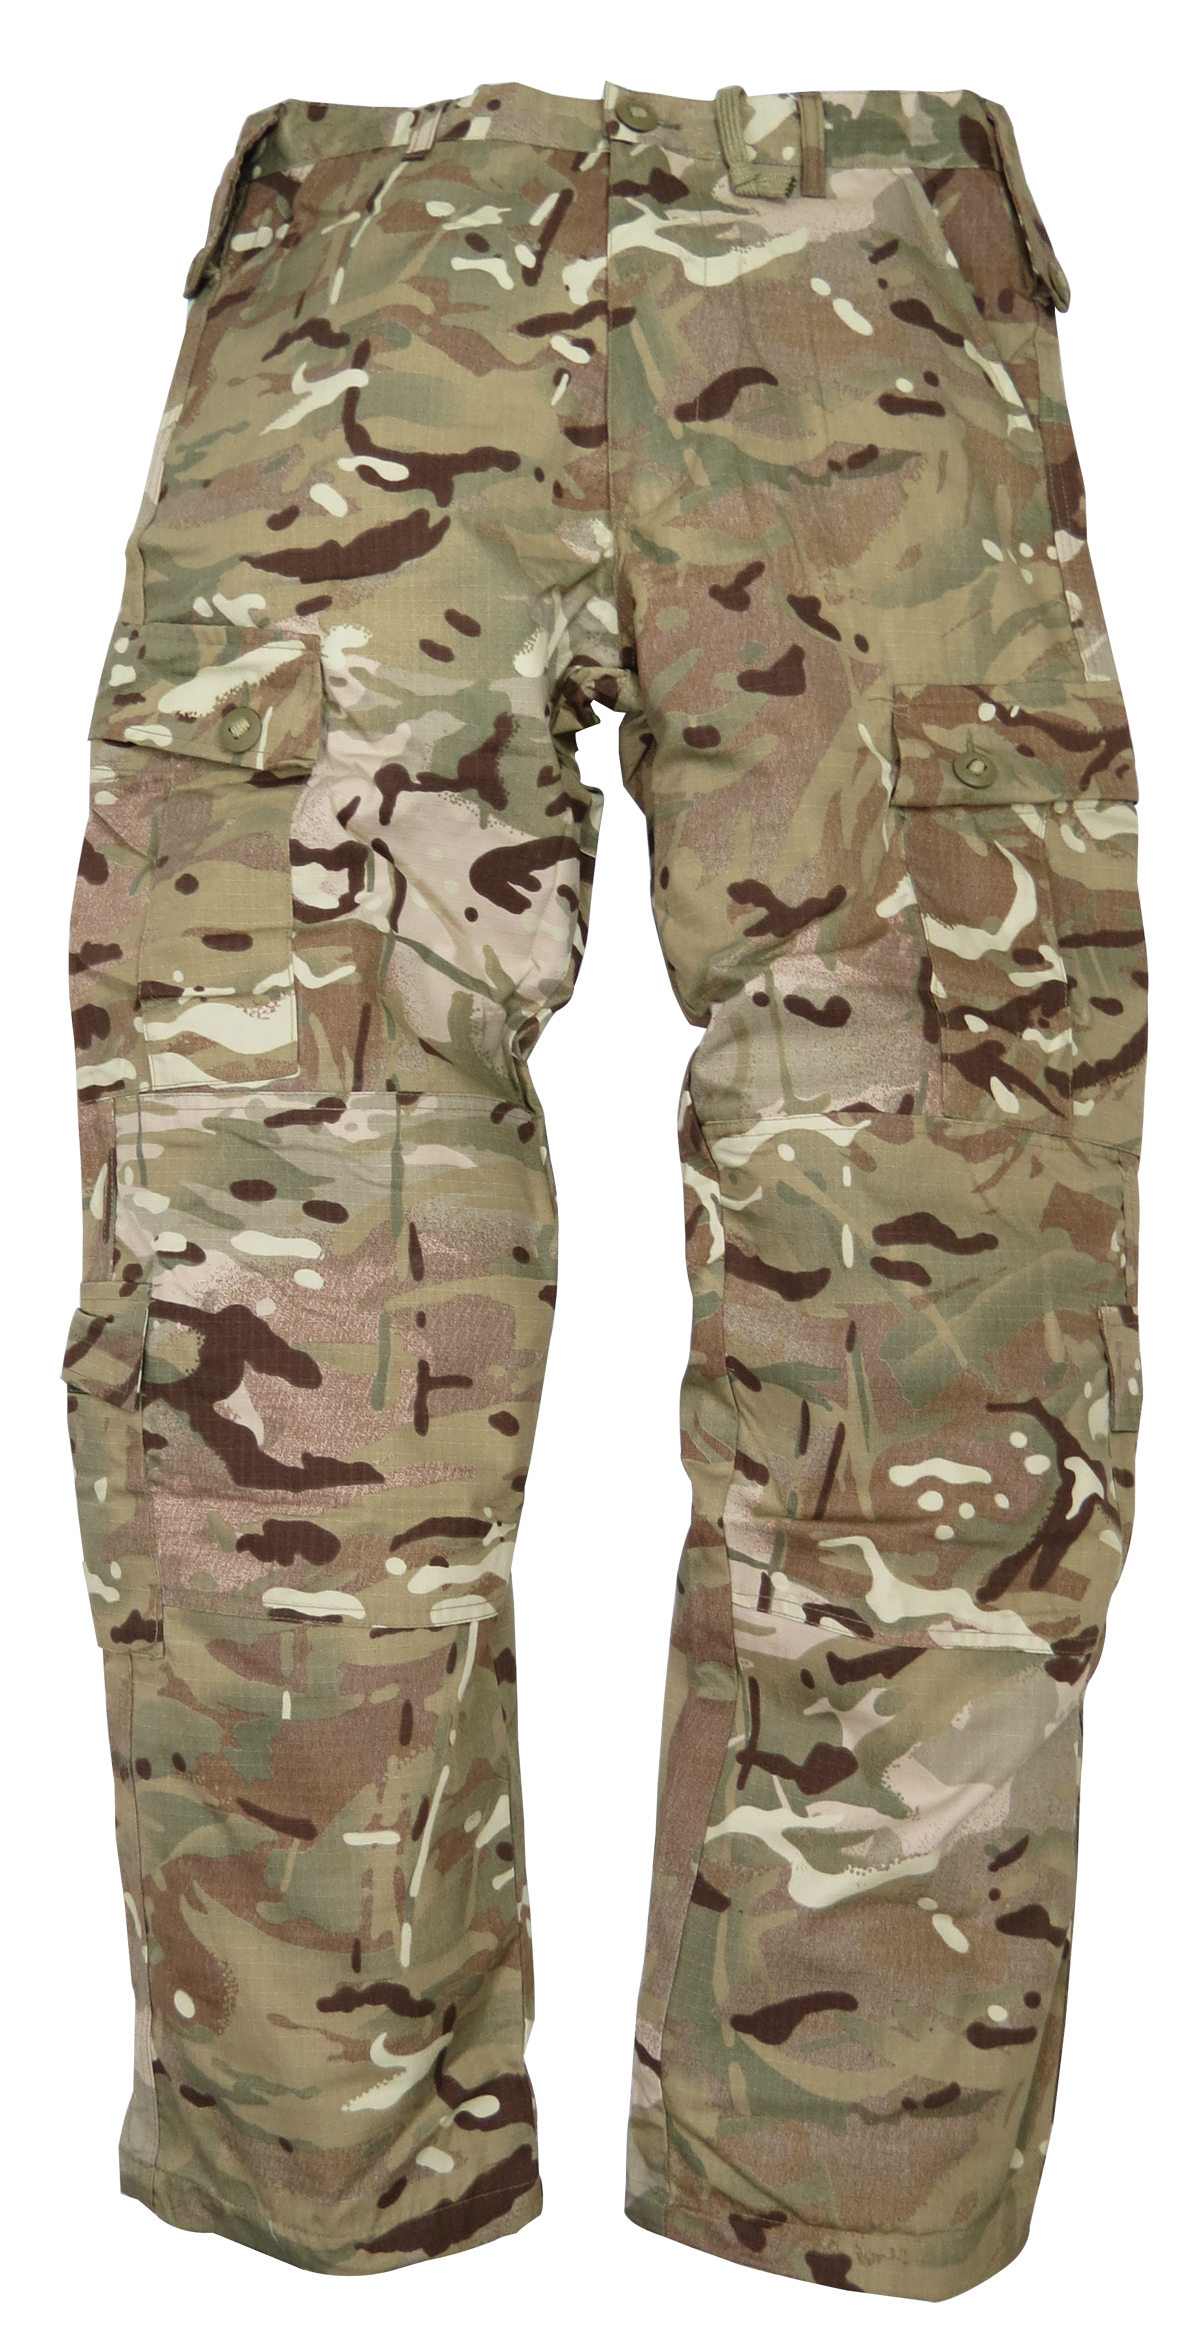 British Army Style Ripstop Elite HMTC Trousers by Highlander